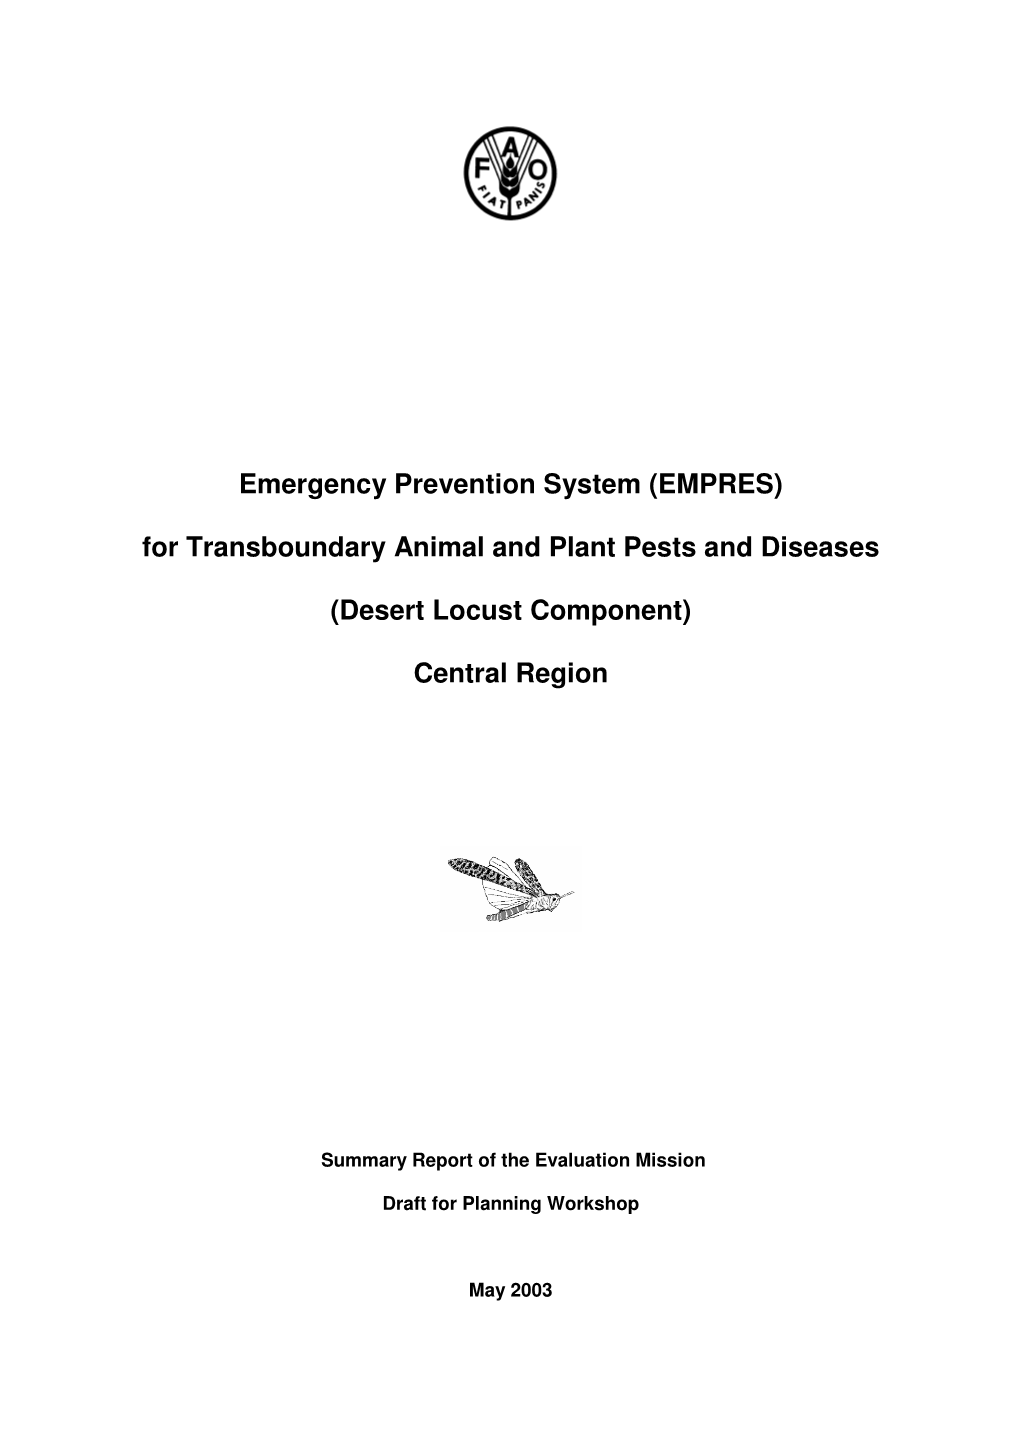 EMPRES) for Transboundary Animal and Plant Pests and Diseases